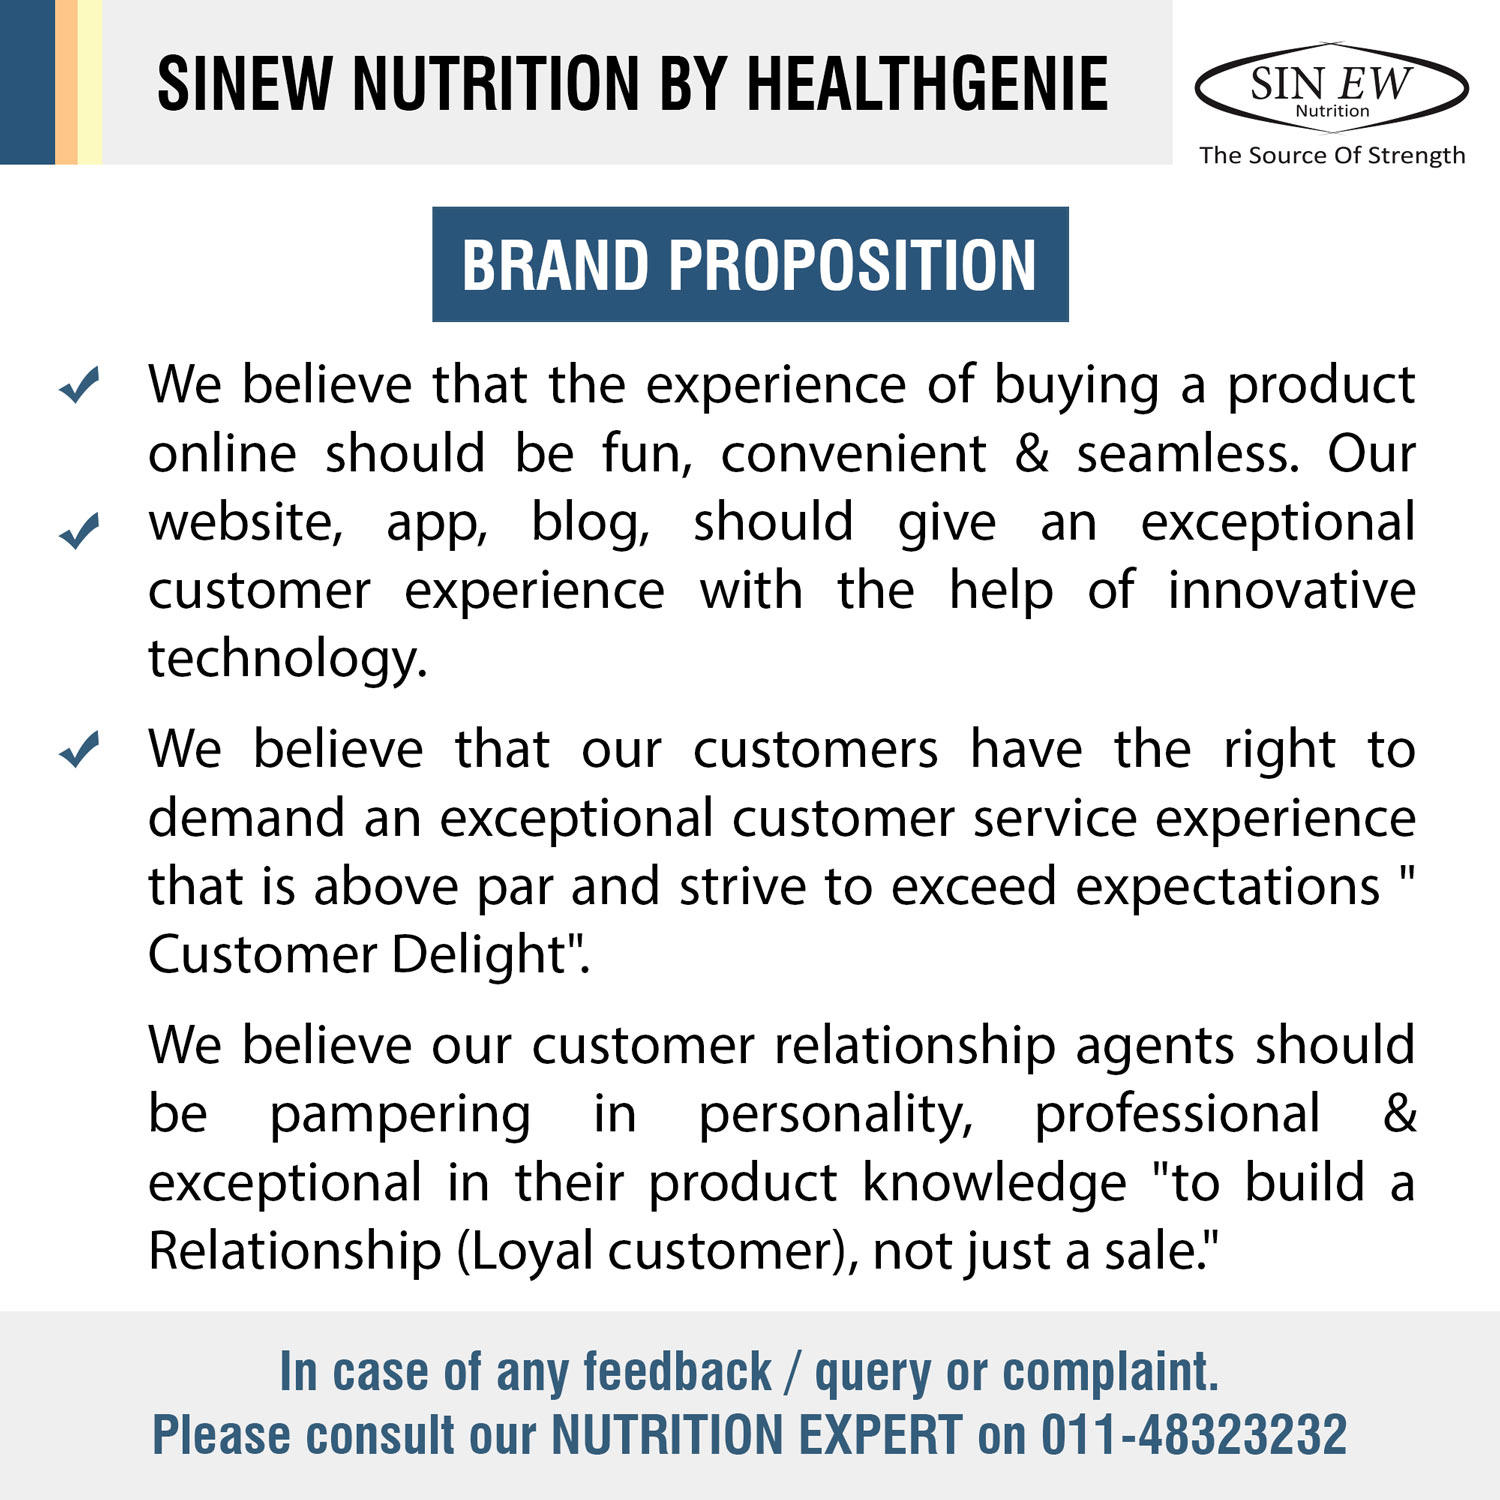 Sinew Nutrition By Healthgenie Brand Proposition